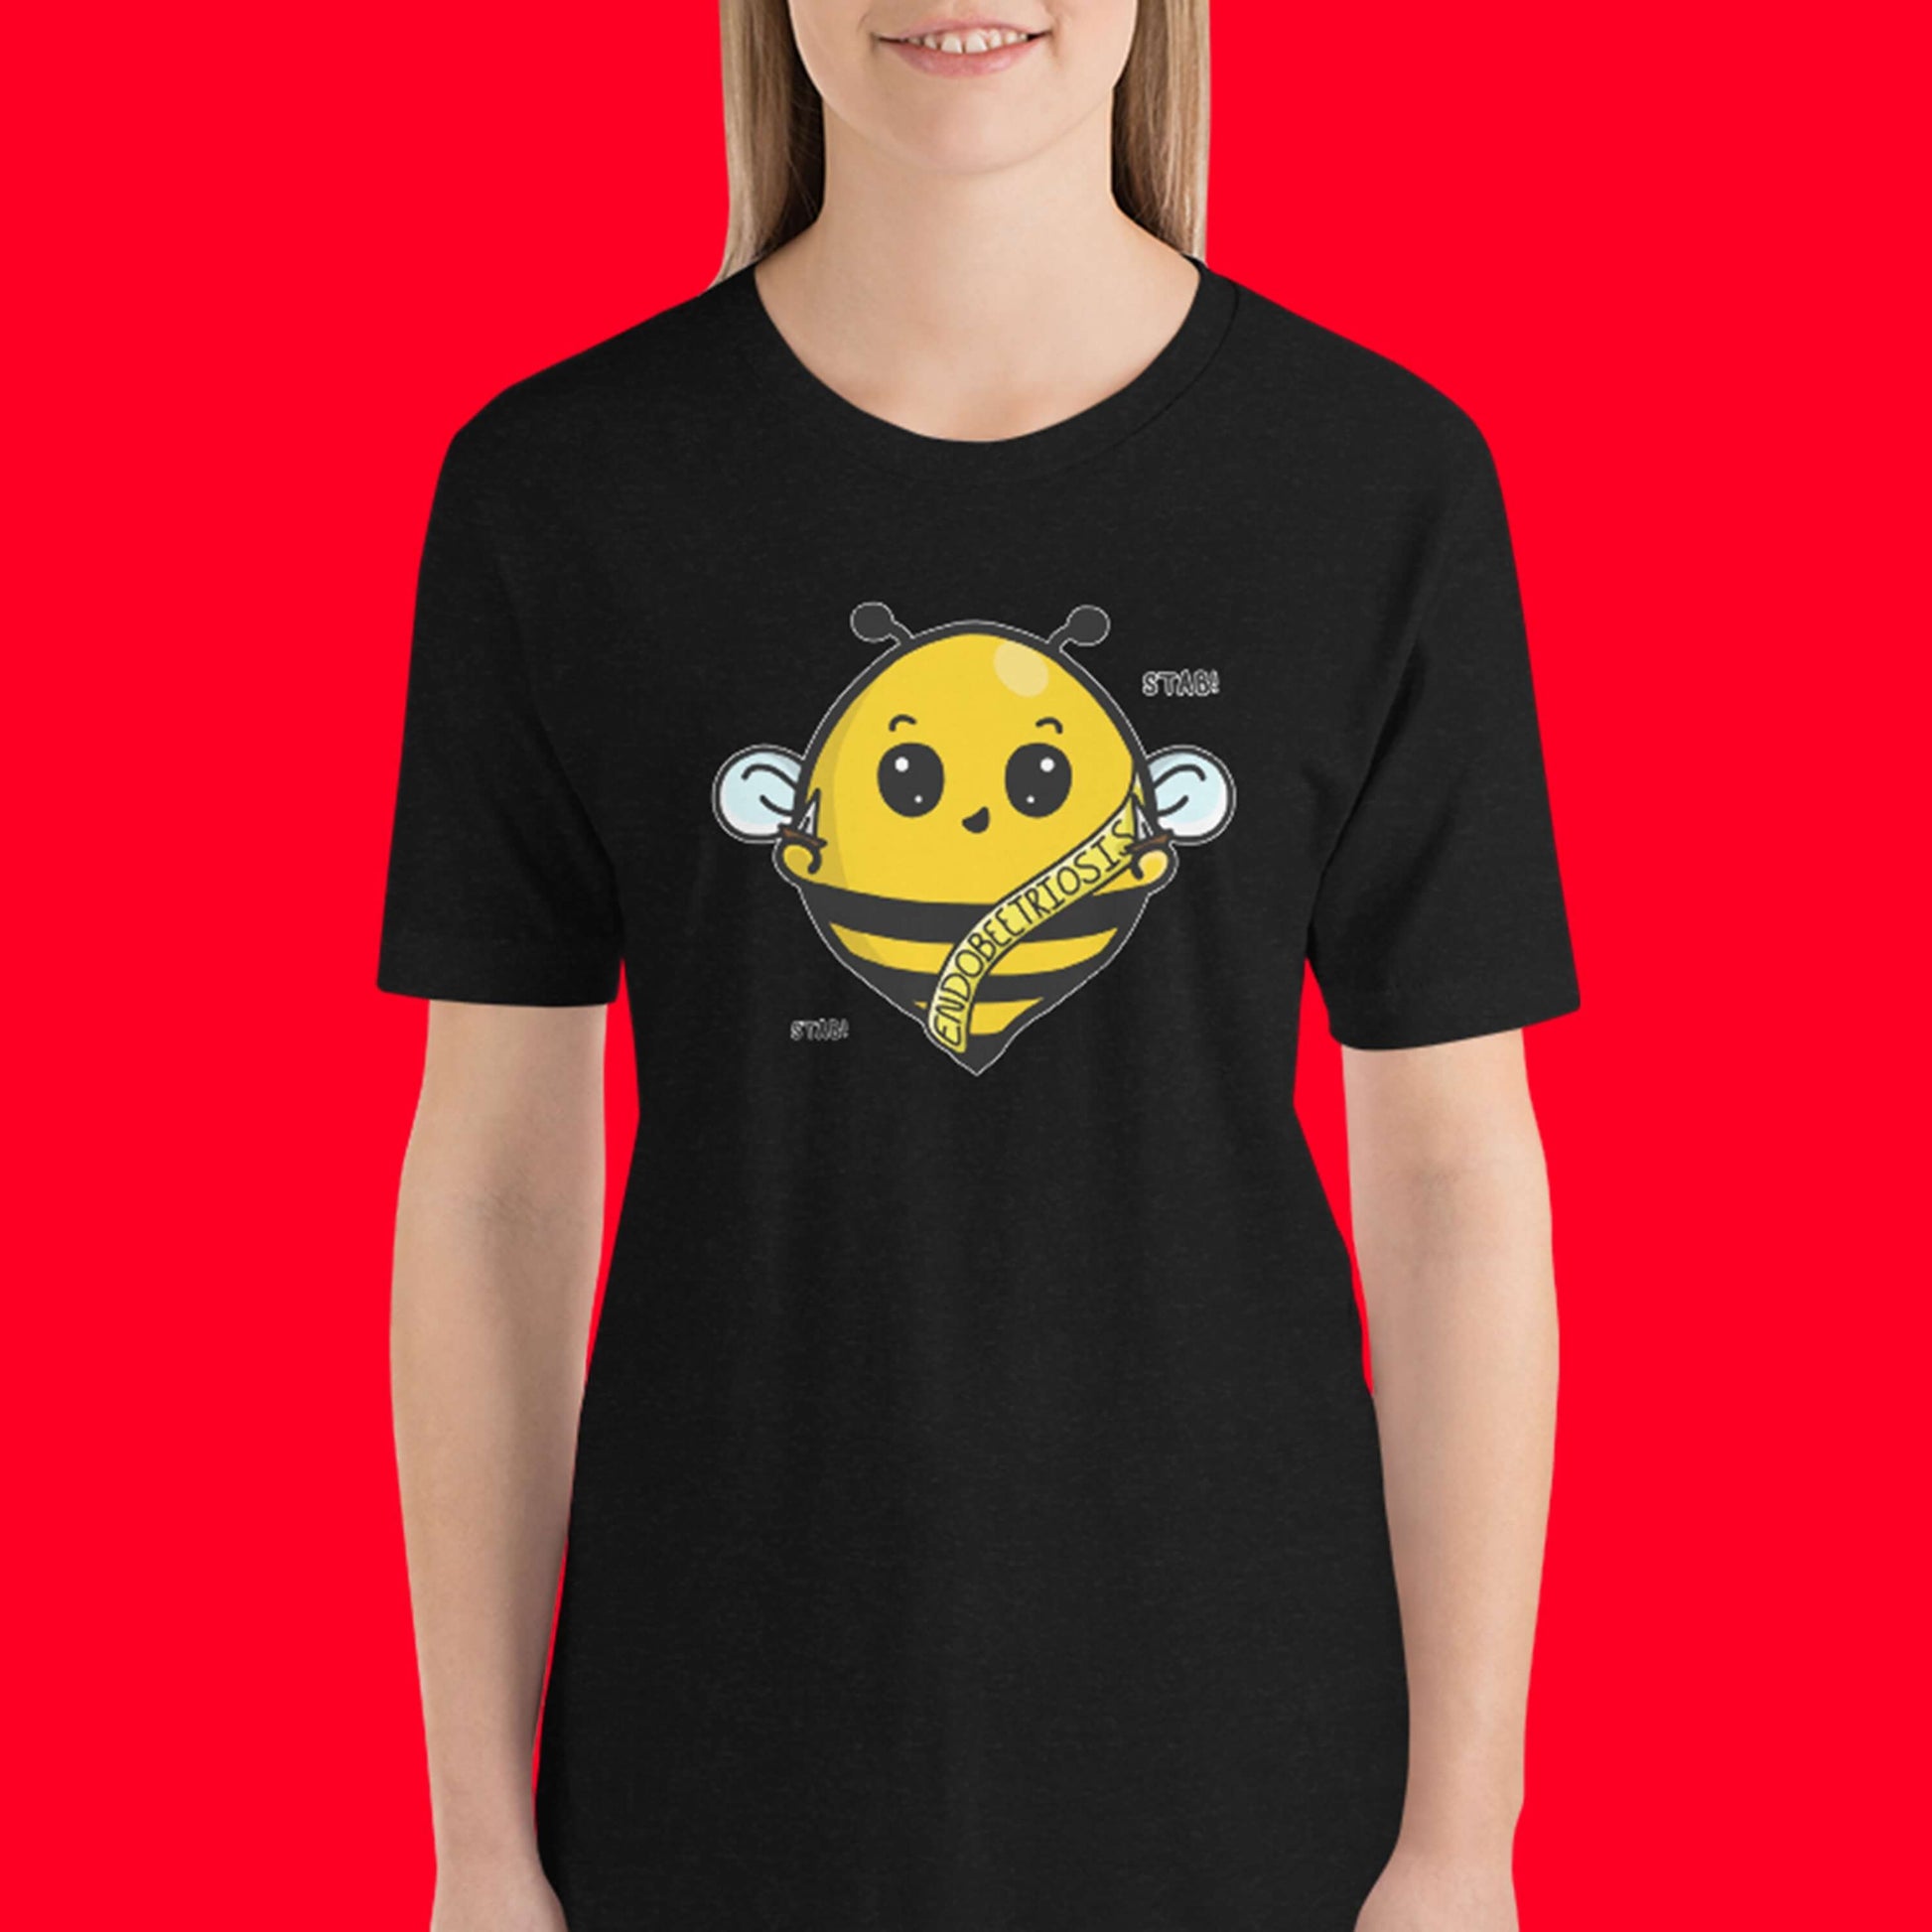 The Endobeetriosis Tee - Endometriosis being modelled by a femme person facing forward smiling on a red background. The black short sleeve tshirt features a smiling happy bumblebee holding small daggers with a yellow banner reading 'endobeetriosis' with the words 'stab! stab!' surrounding the buzzy bee. The hand drawn design is raising awareness for endometriosis.